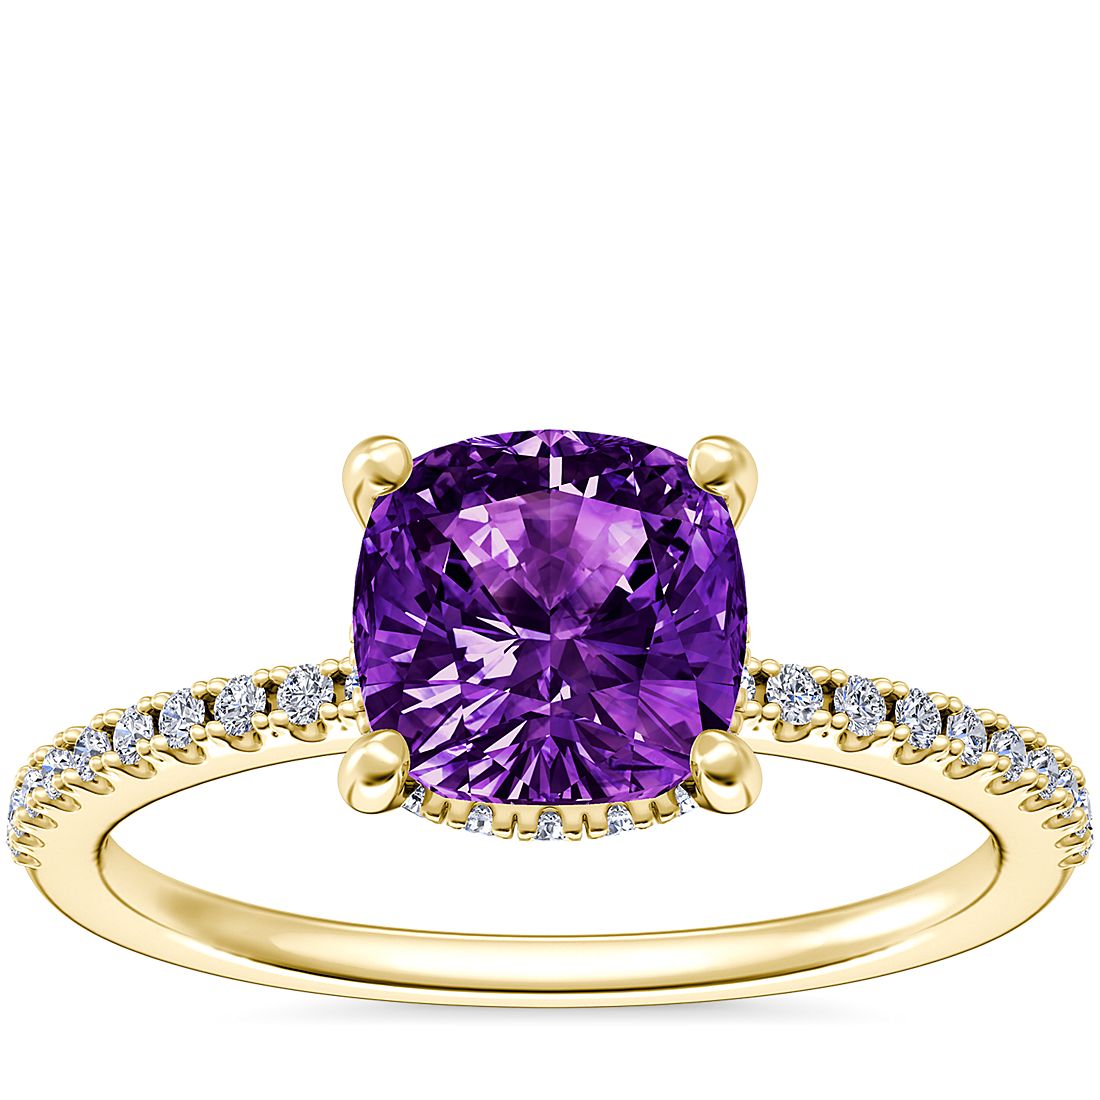 Petite Micropavé Hidden Halo Engagement Ring with Cushion Amethyst in 14k Yellow Gold (6.5mm)